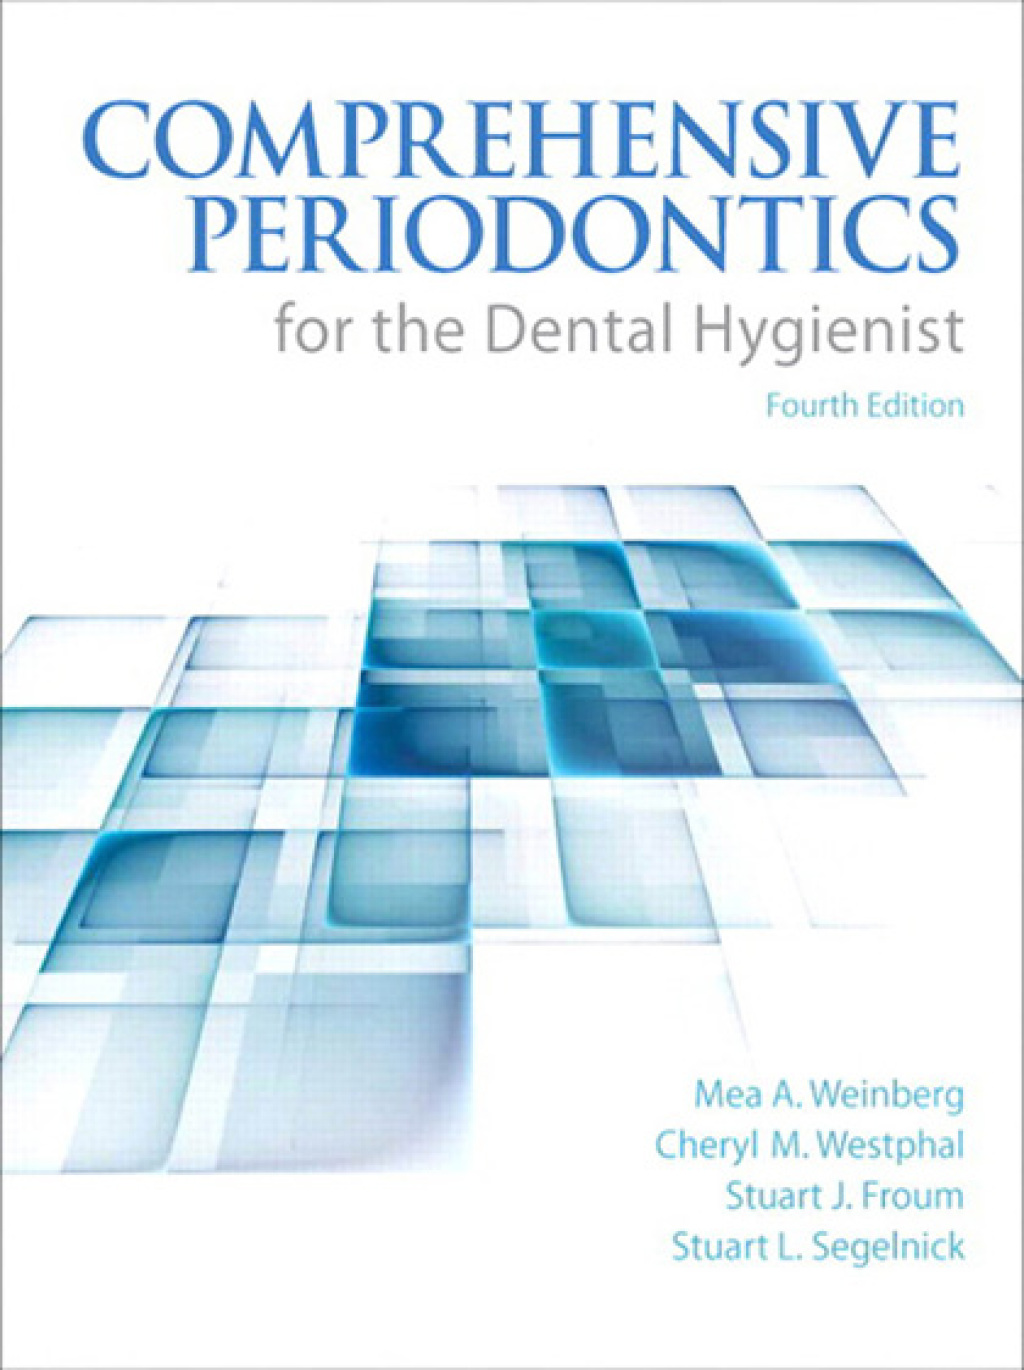 Comprehensive Periodontics for the Dental Hygienist - 4th Edition (eBook)